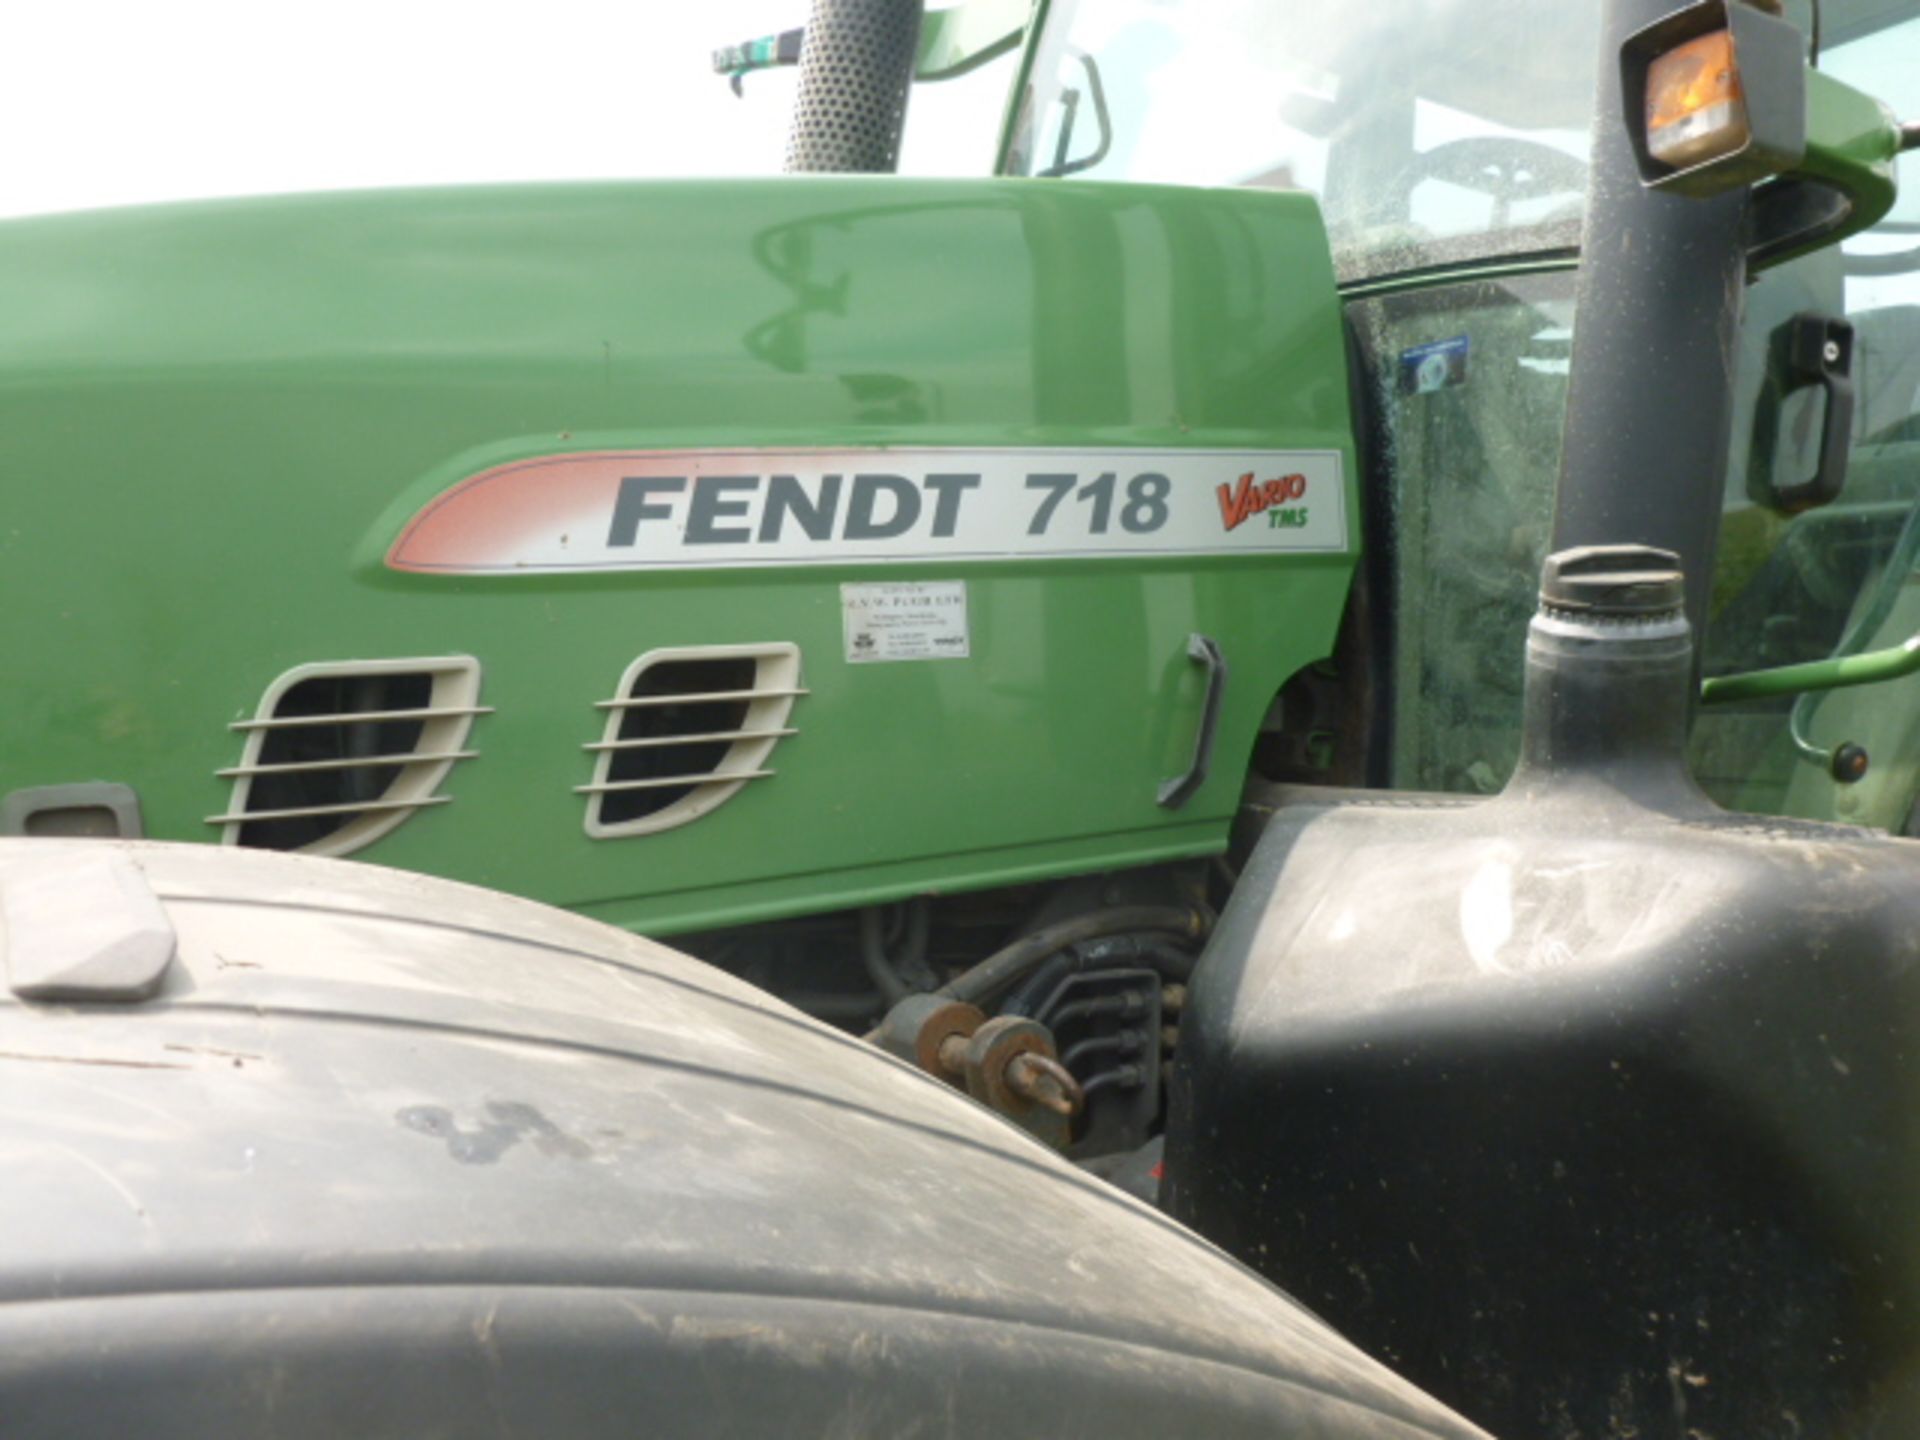 FENDT 718 VARIO TMS TRACTOR (7305)HOURS C/W FRONT WEIGHT 1260KG REG DX08 NHN ONE OWNER FROM NEW - Image 10 of 10